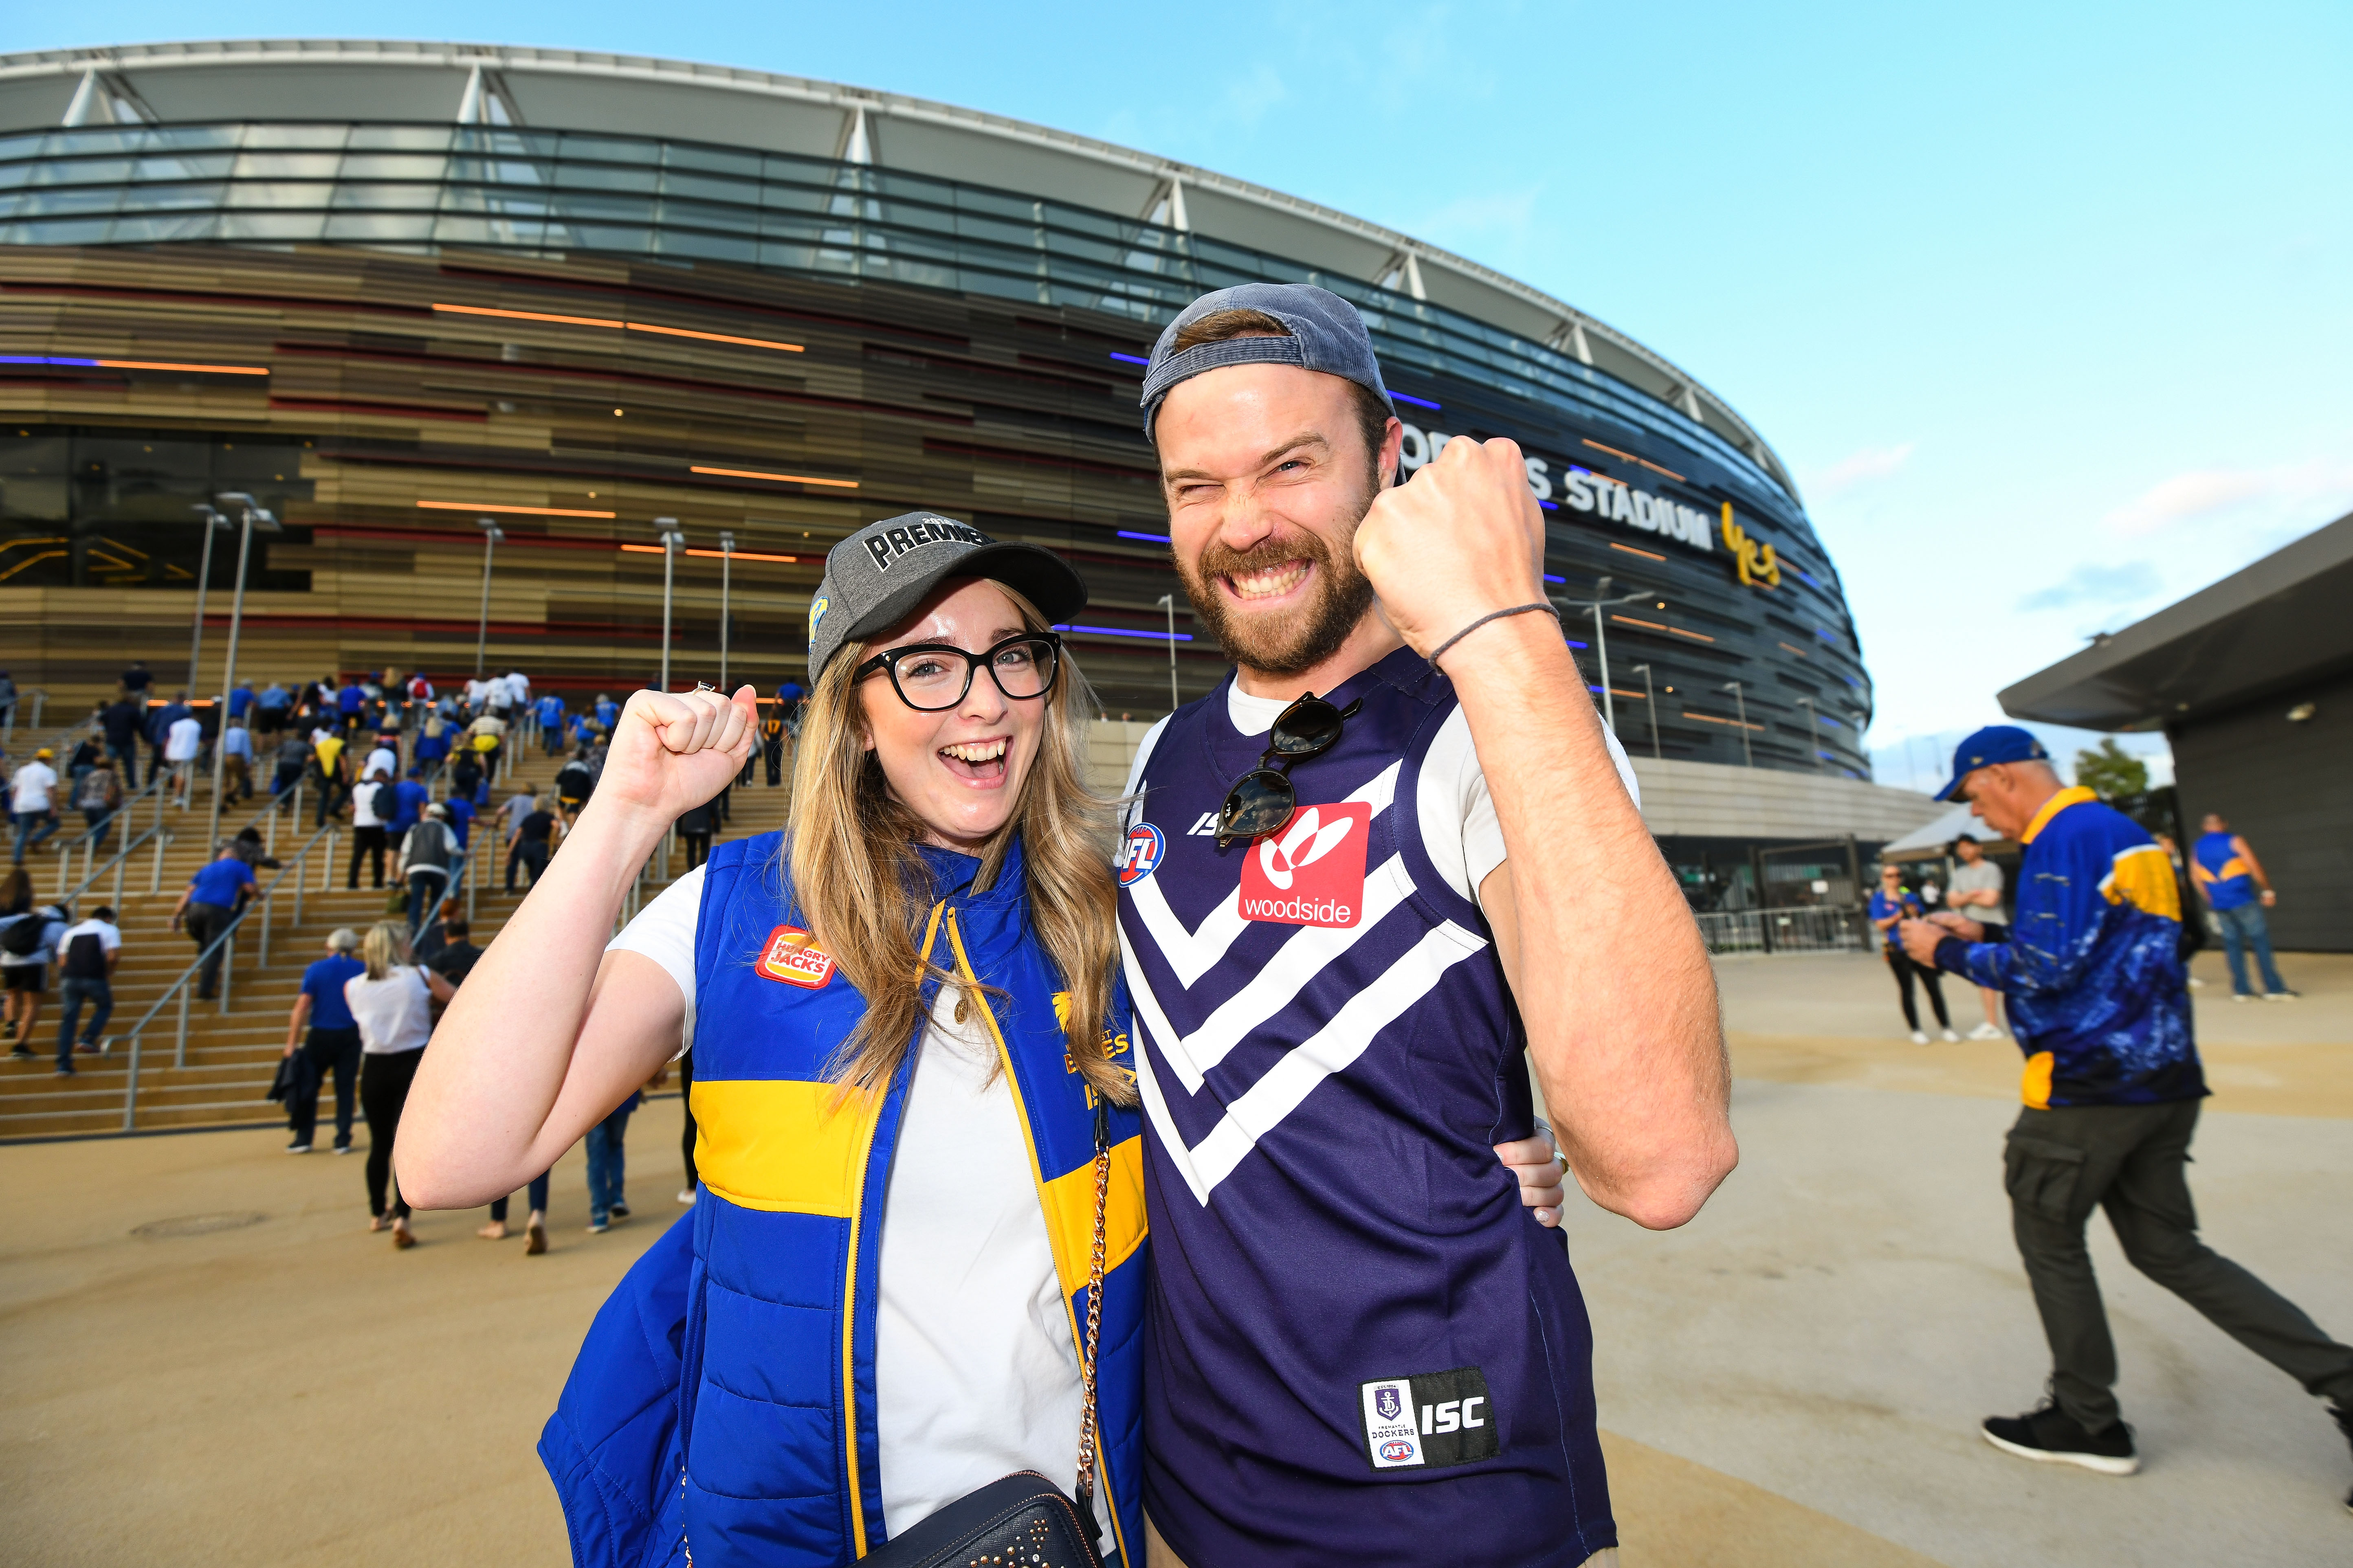 WA footy fans ready for a derby at Optus Stadium